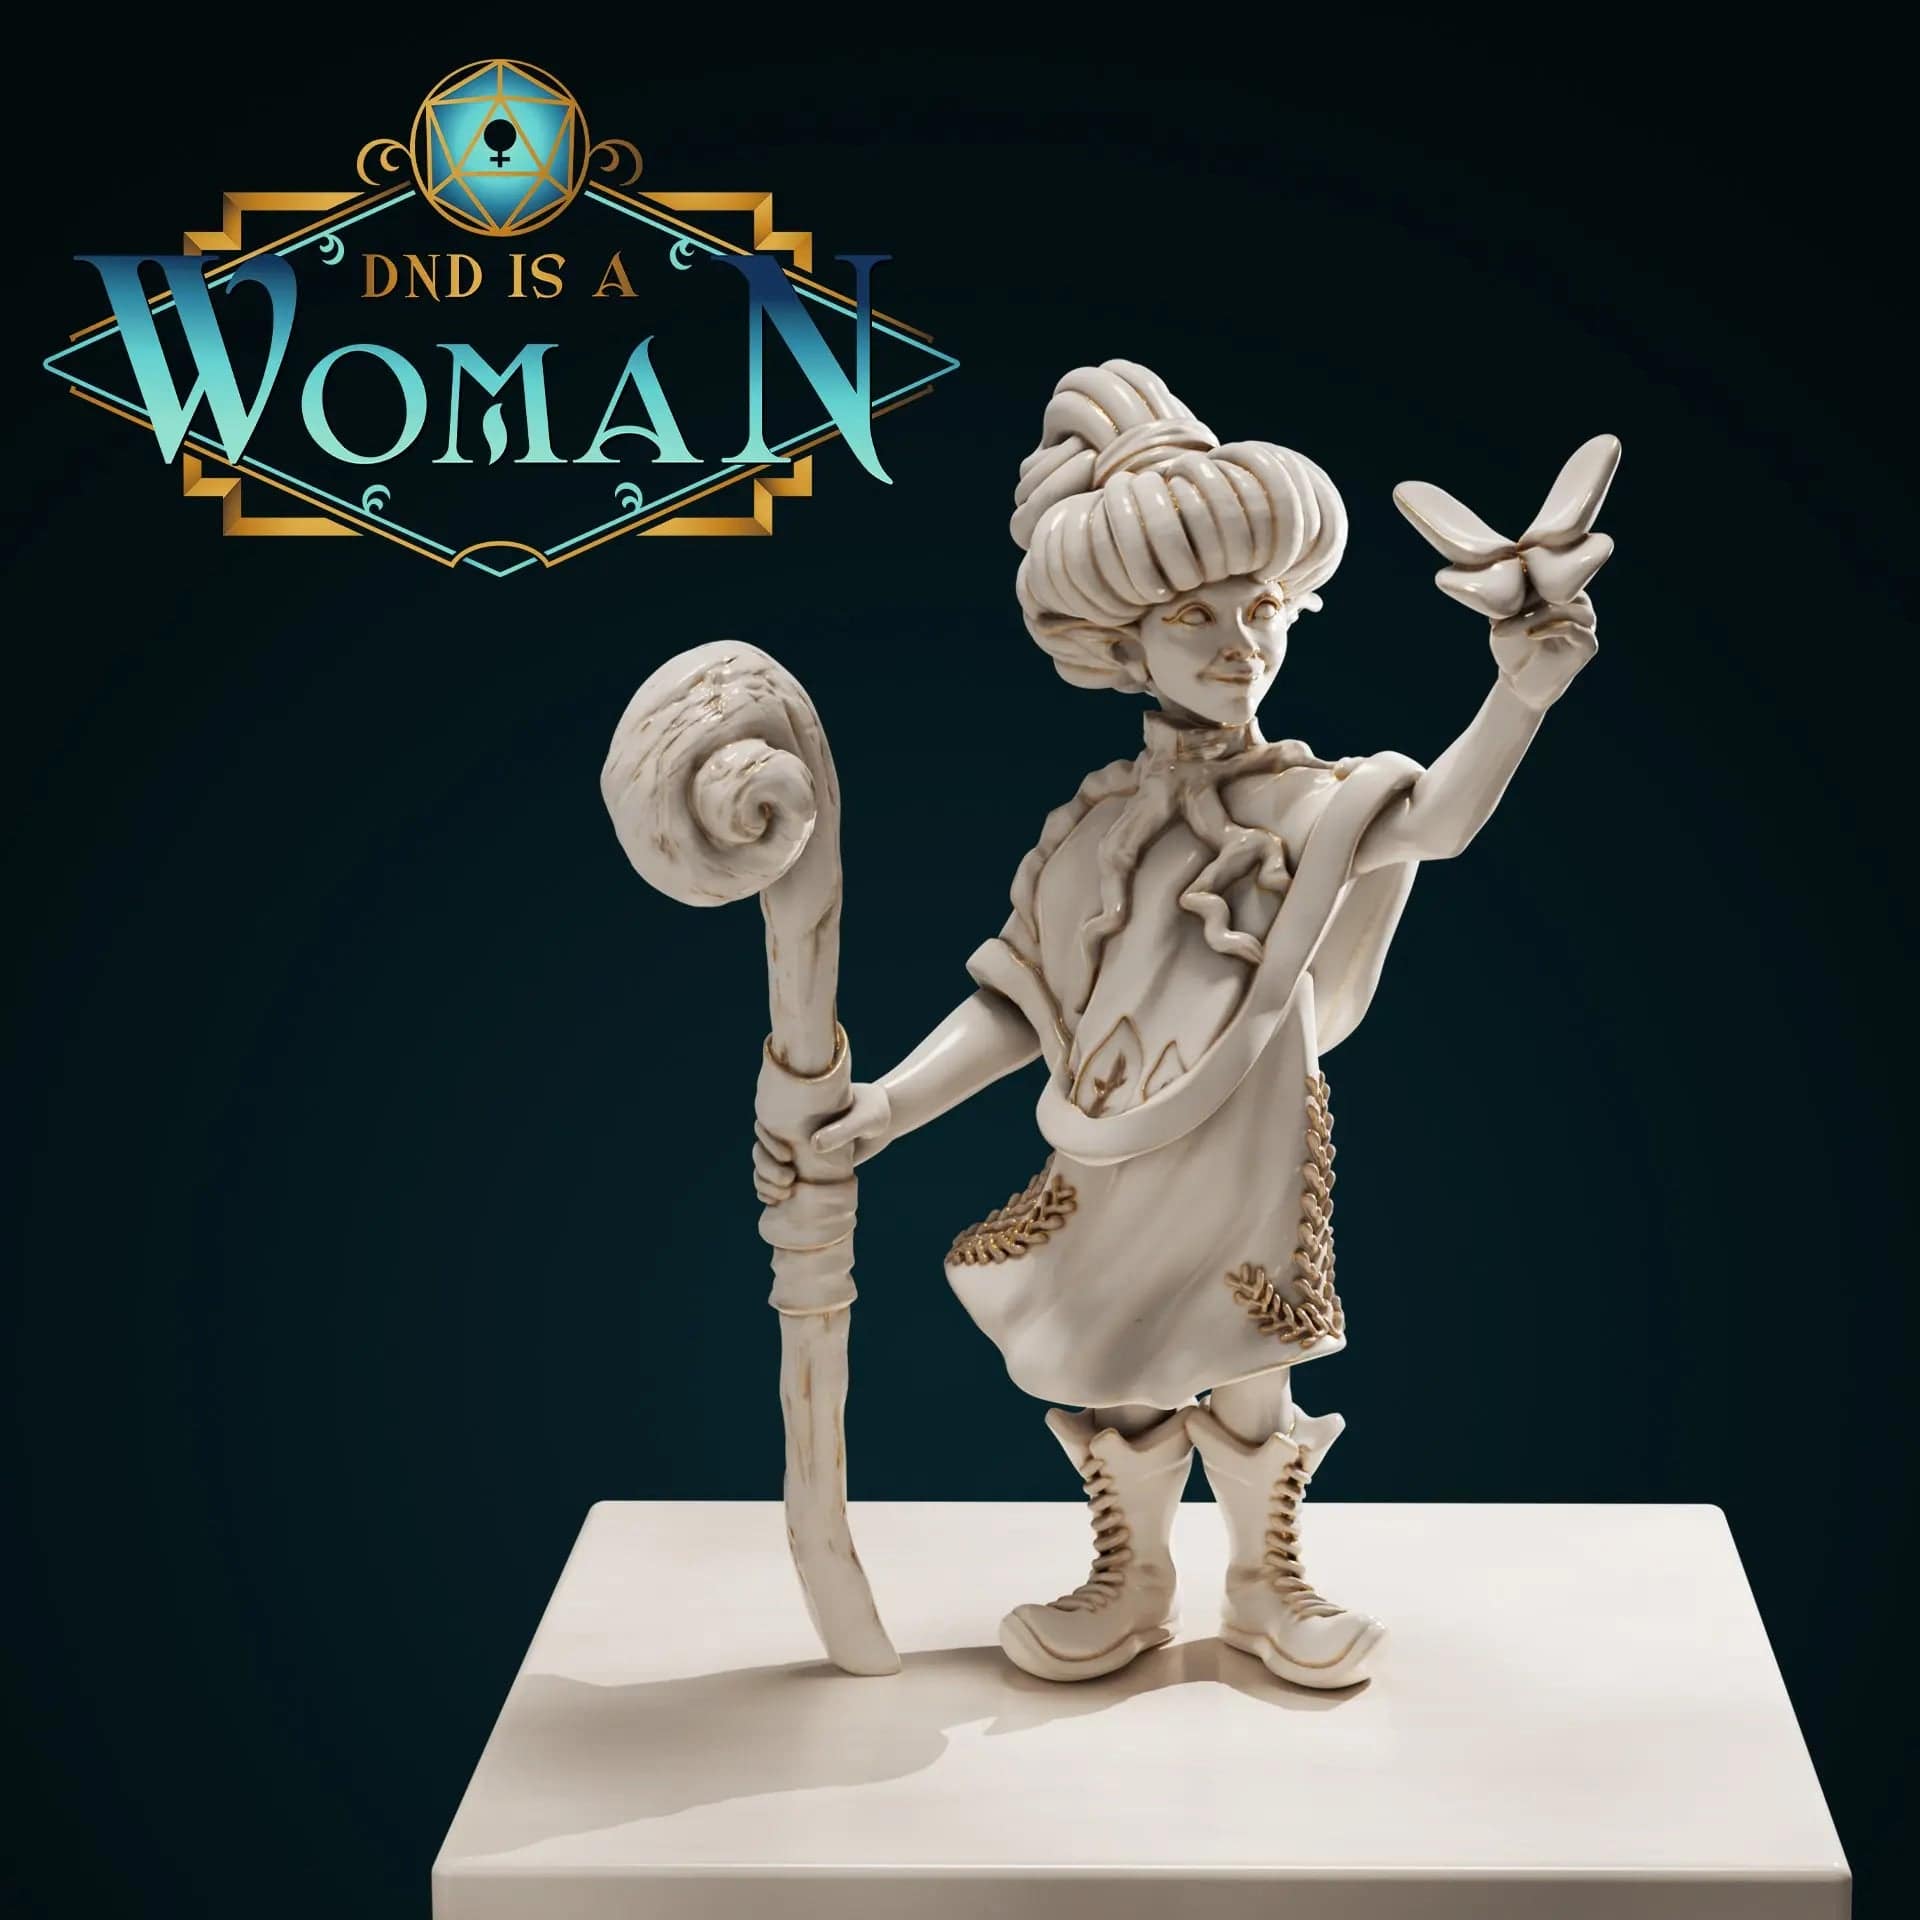 Fengles, Gnome Druid | D&D Miniature TTRPG Character | DND is a Woman - Tattles Told 3D